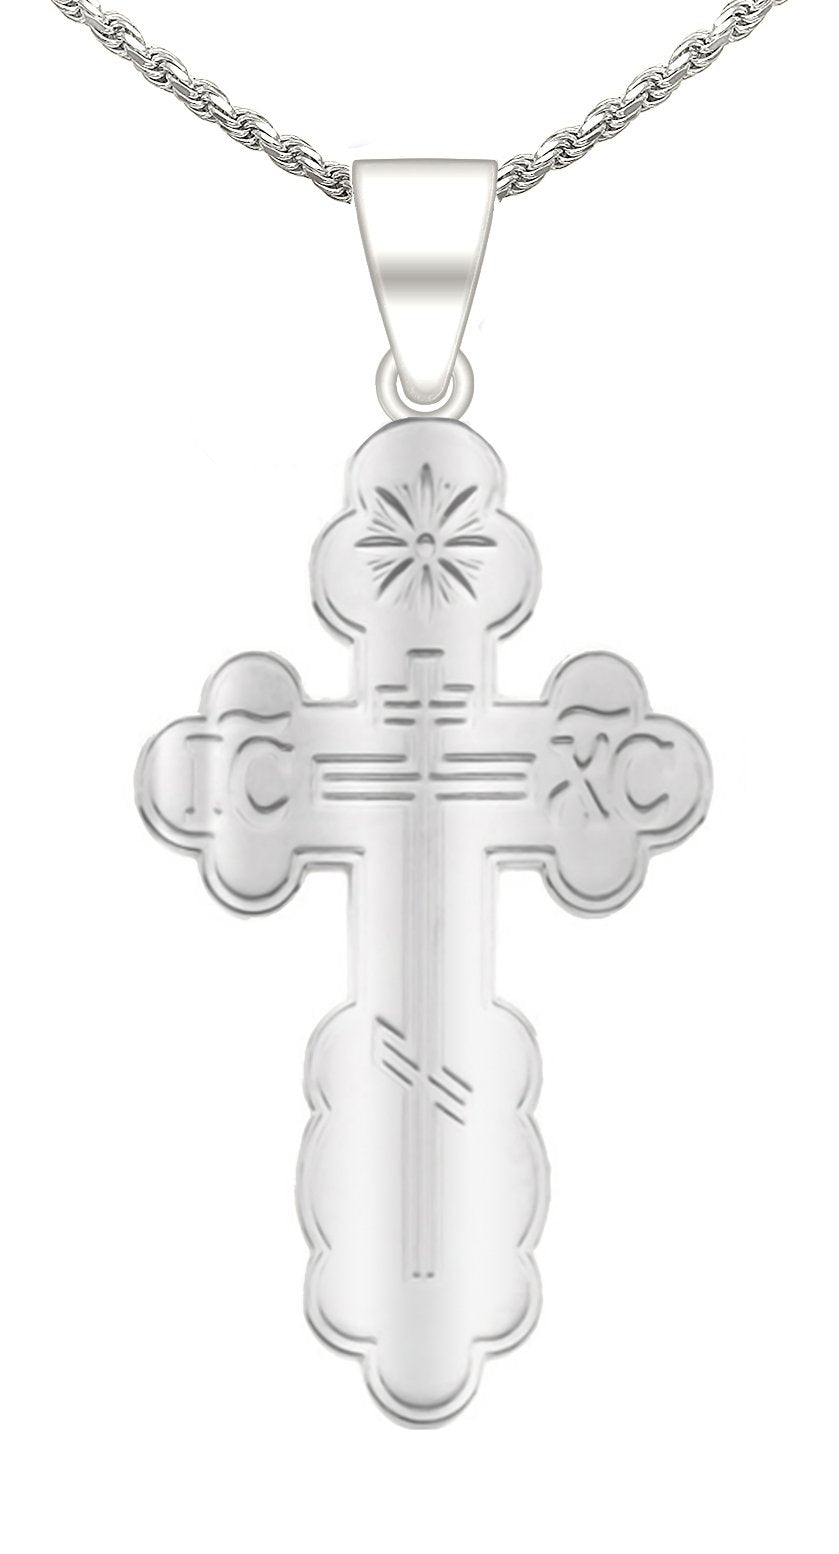 Solid 14k White Gold Orthodox Cross Pendant Necklace